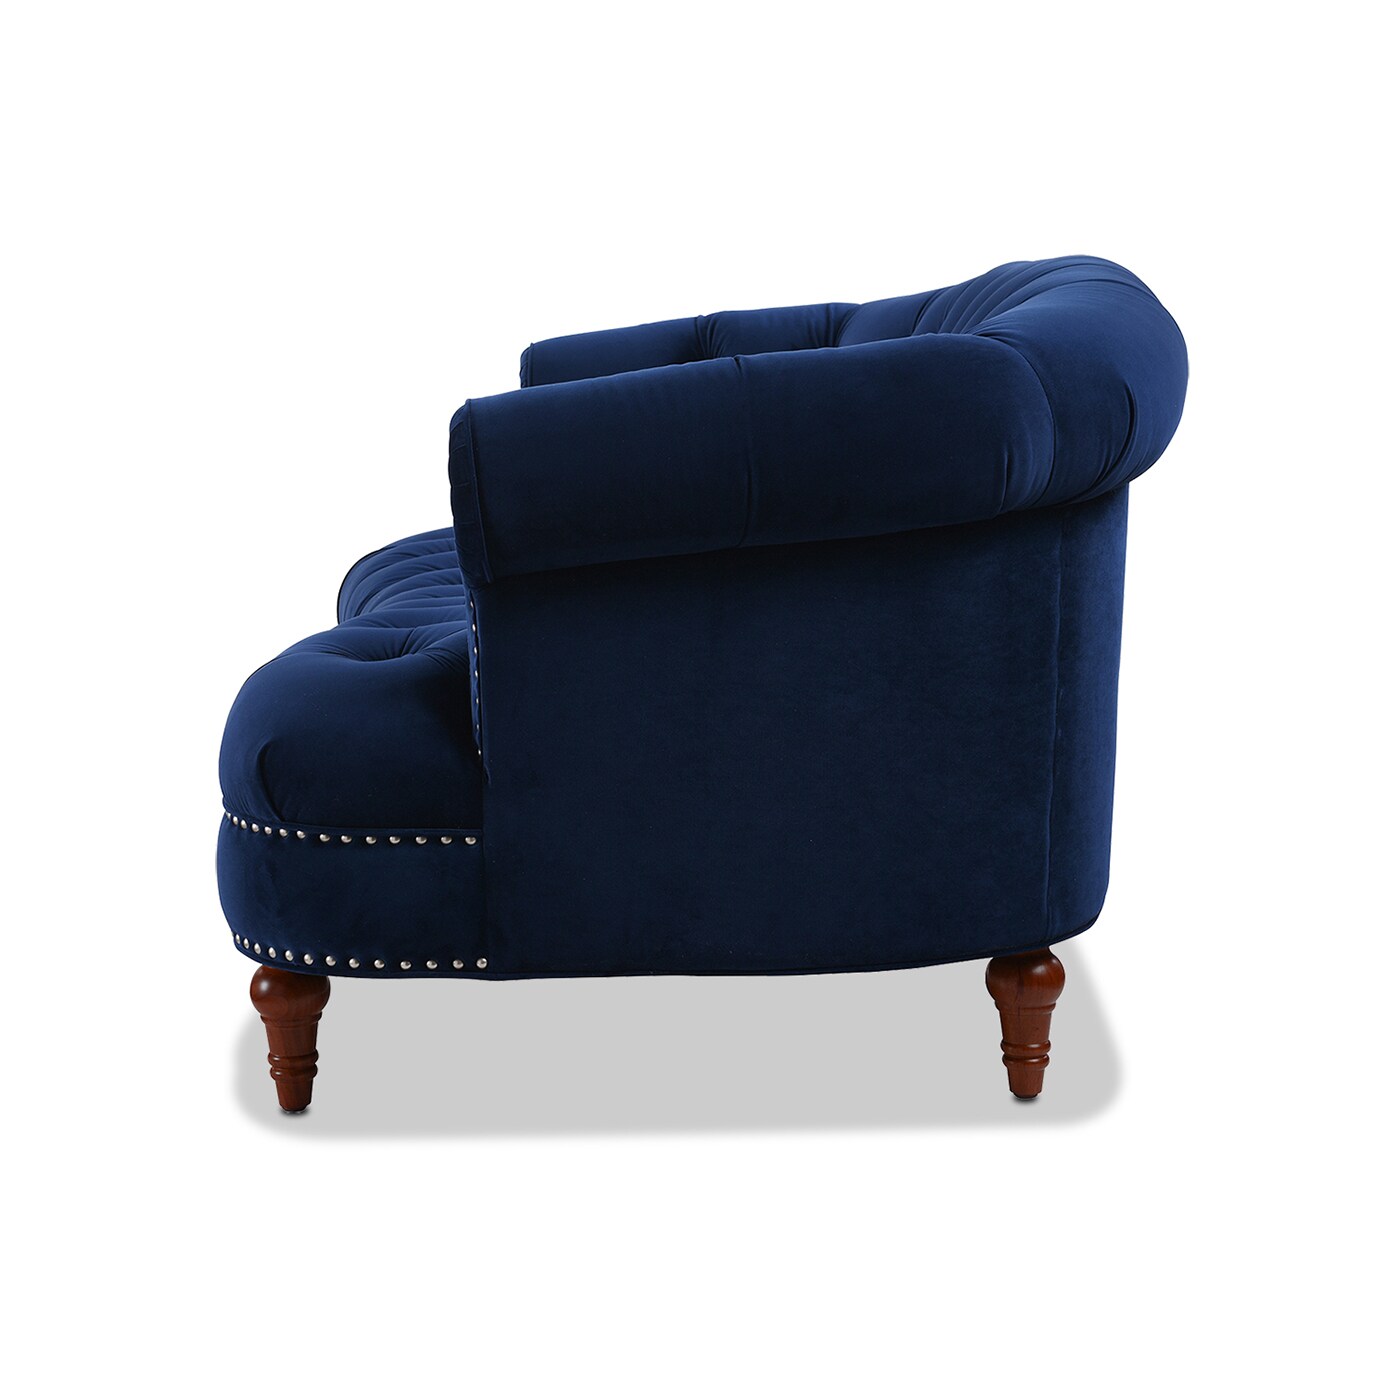 68.5-in Sofas Loveseats Velvet at Couches, in 2-seater Home Navy & Taylor La Jennifer Blue department Loveseat Rosa Midcentury the